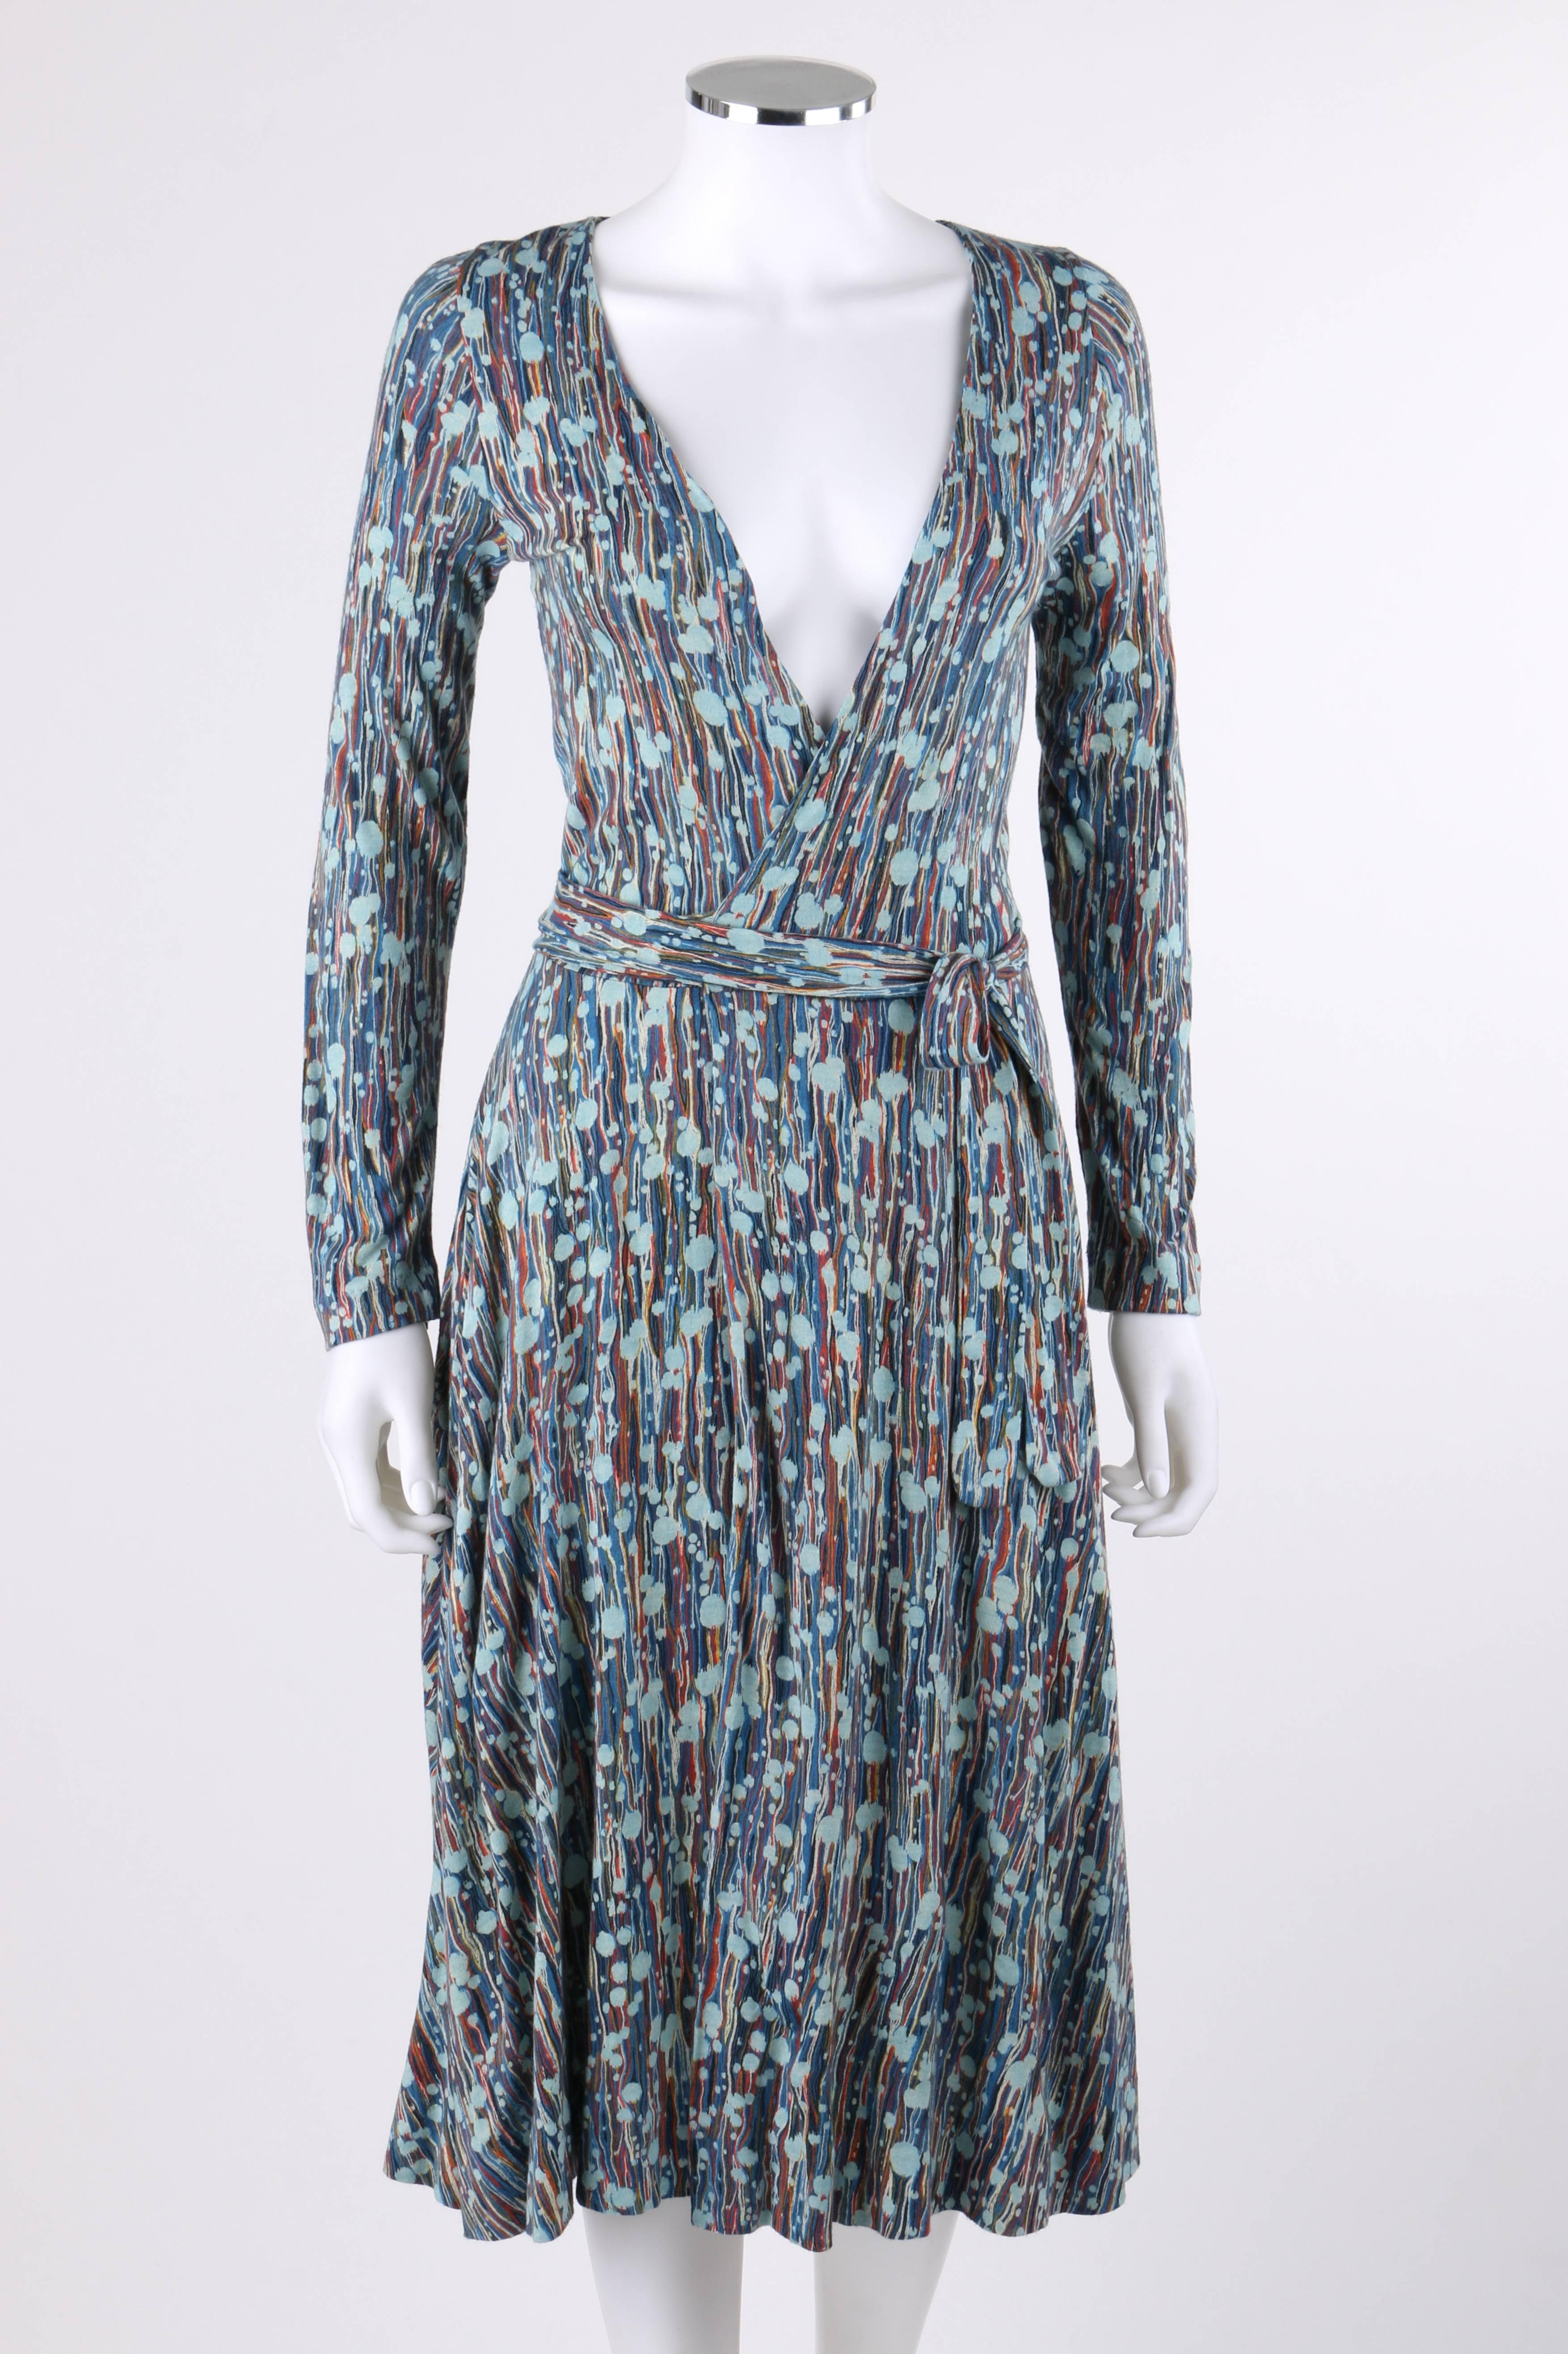 Vintage Diane Von Furstenberg DVF c.1970's multi-color painterly print jersey knit iconic wrap dress. Abstract painterly print in shades of orange, yellow, black, blue, and white. Deep v-neckline. Long sleeves. Two attached fabric ties at waist.